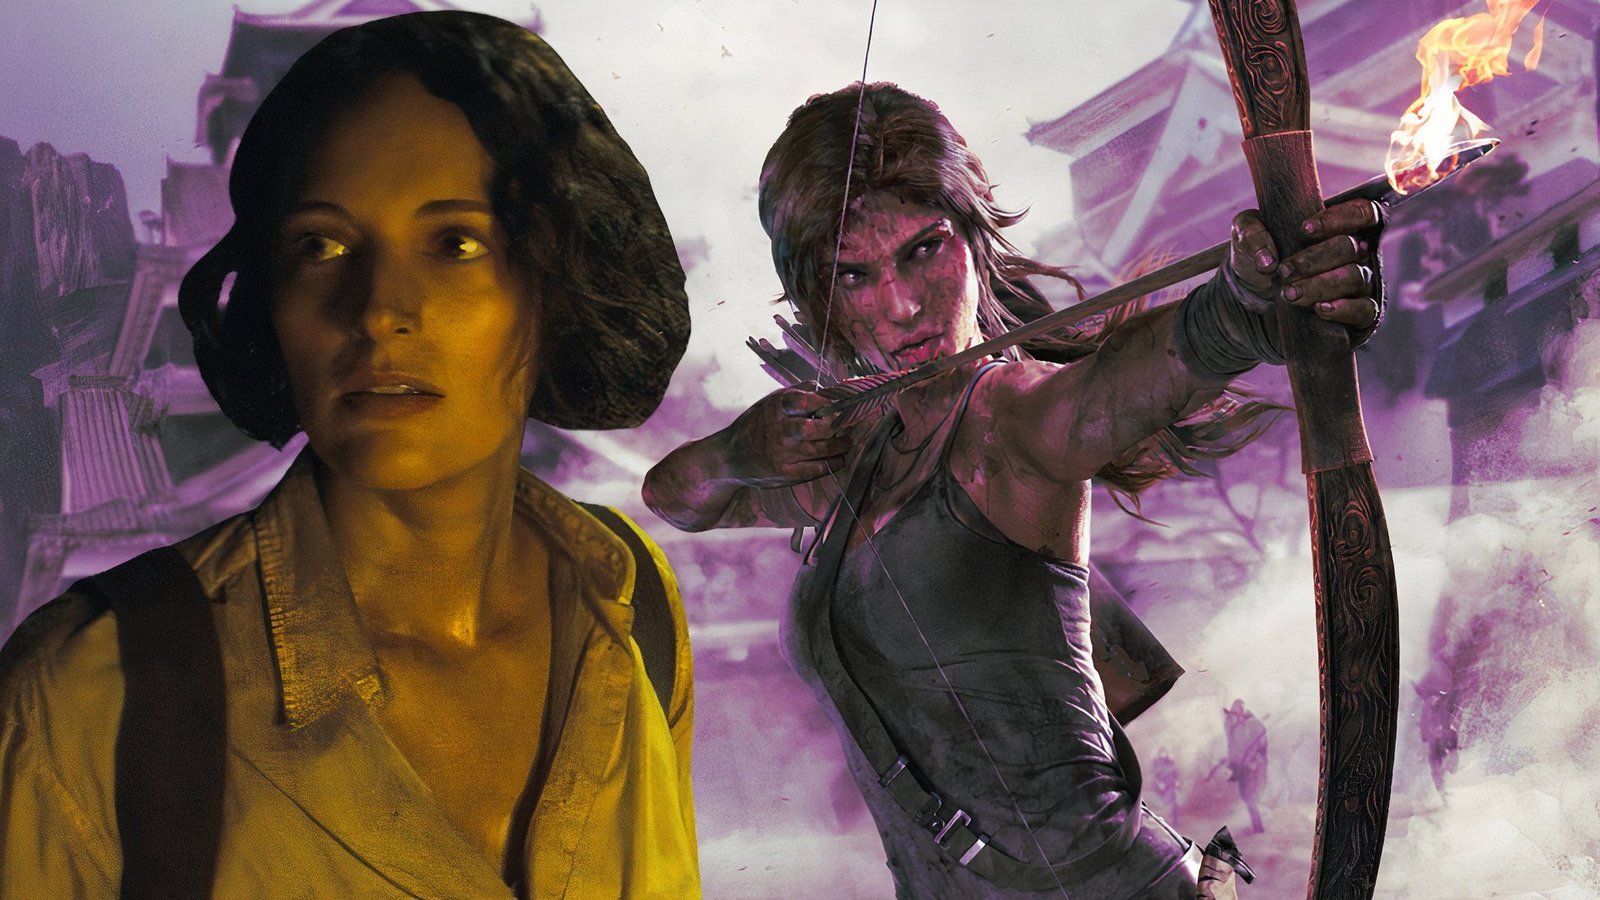 Tomb Raider Series from Phoebe Waller-Bridge Coming to Prime Video